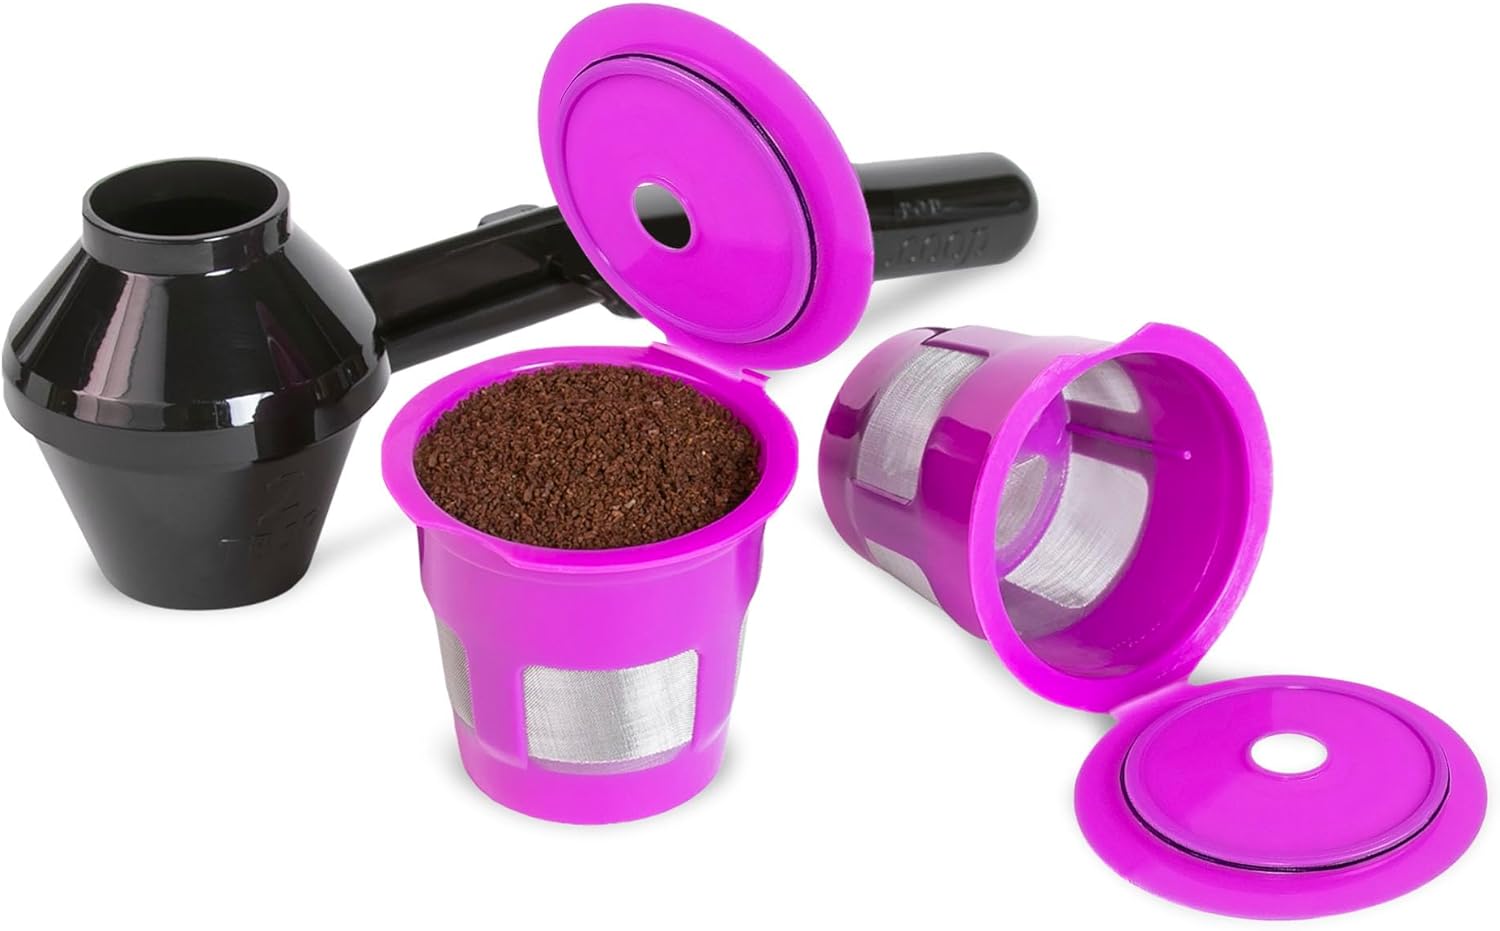 Cafe Fill Value Pack by Perfect Pod - Reusable K Cup Coffee Pod Filters  Scoop, Compatible with Keurig K-Duo, K-Mini, 1.0, 2.0, K-Series and Select Single Cup Coffee Makers